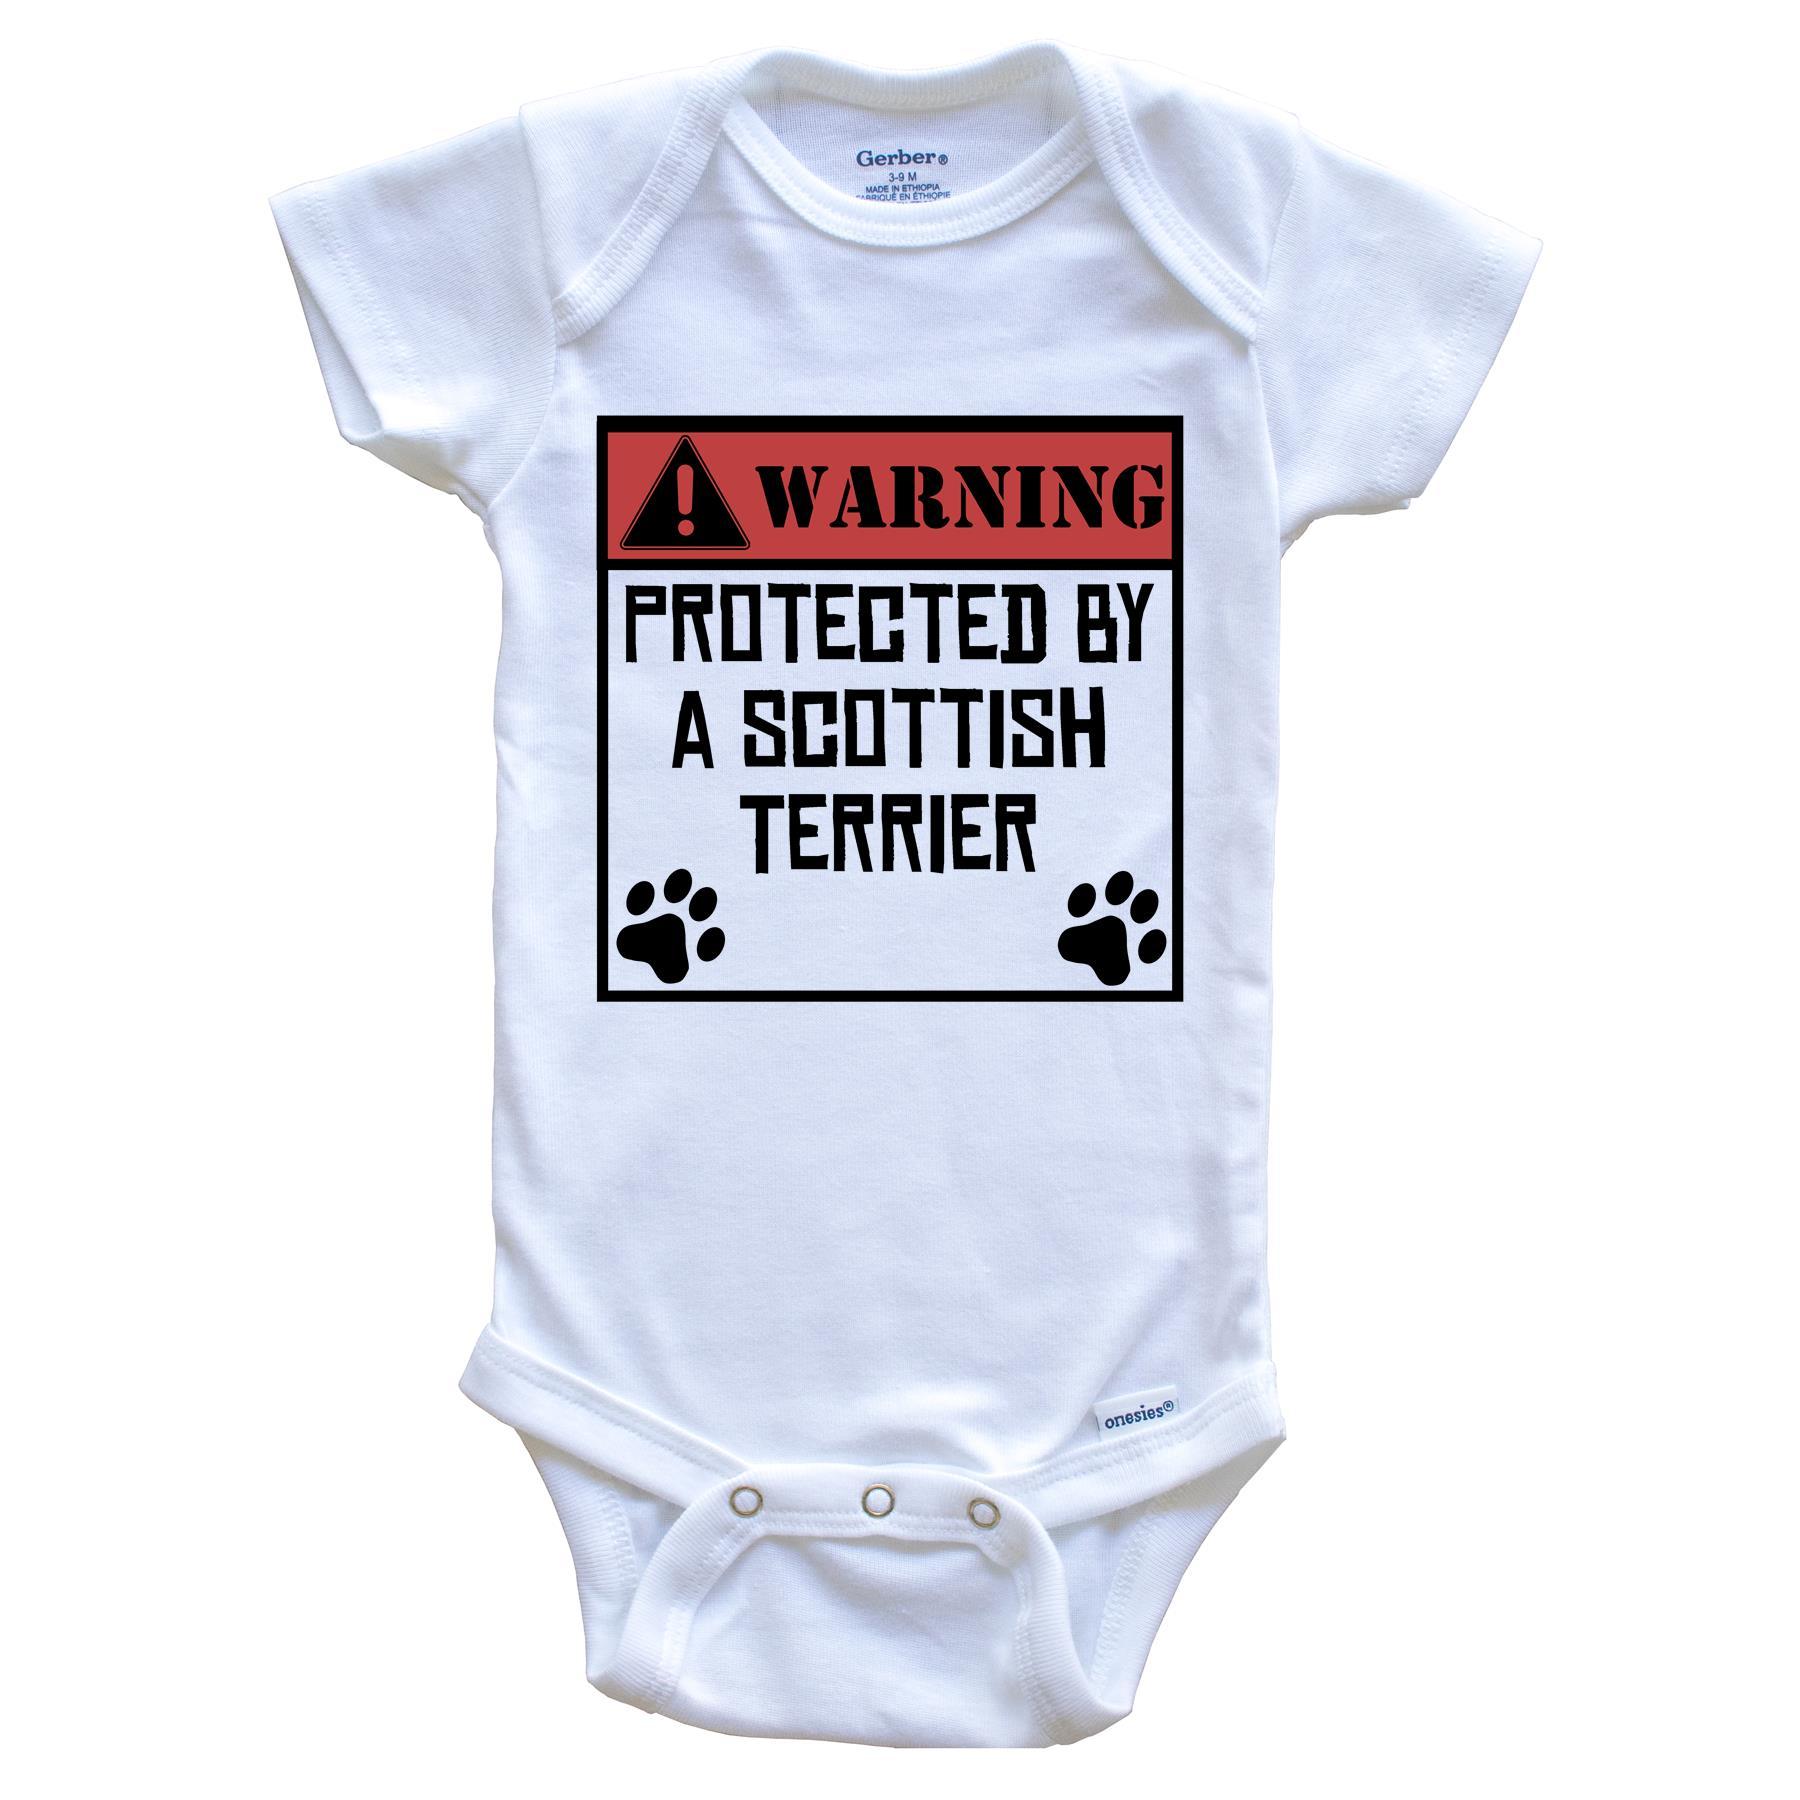 Warning Protected By A Scottish Terrier Funny Baby Onesie